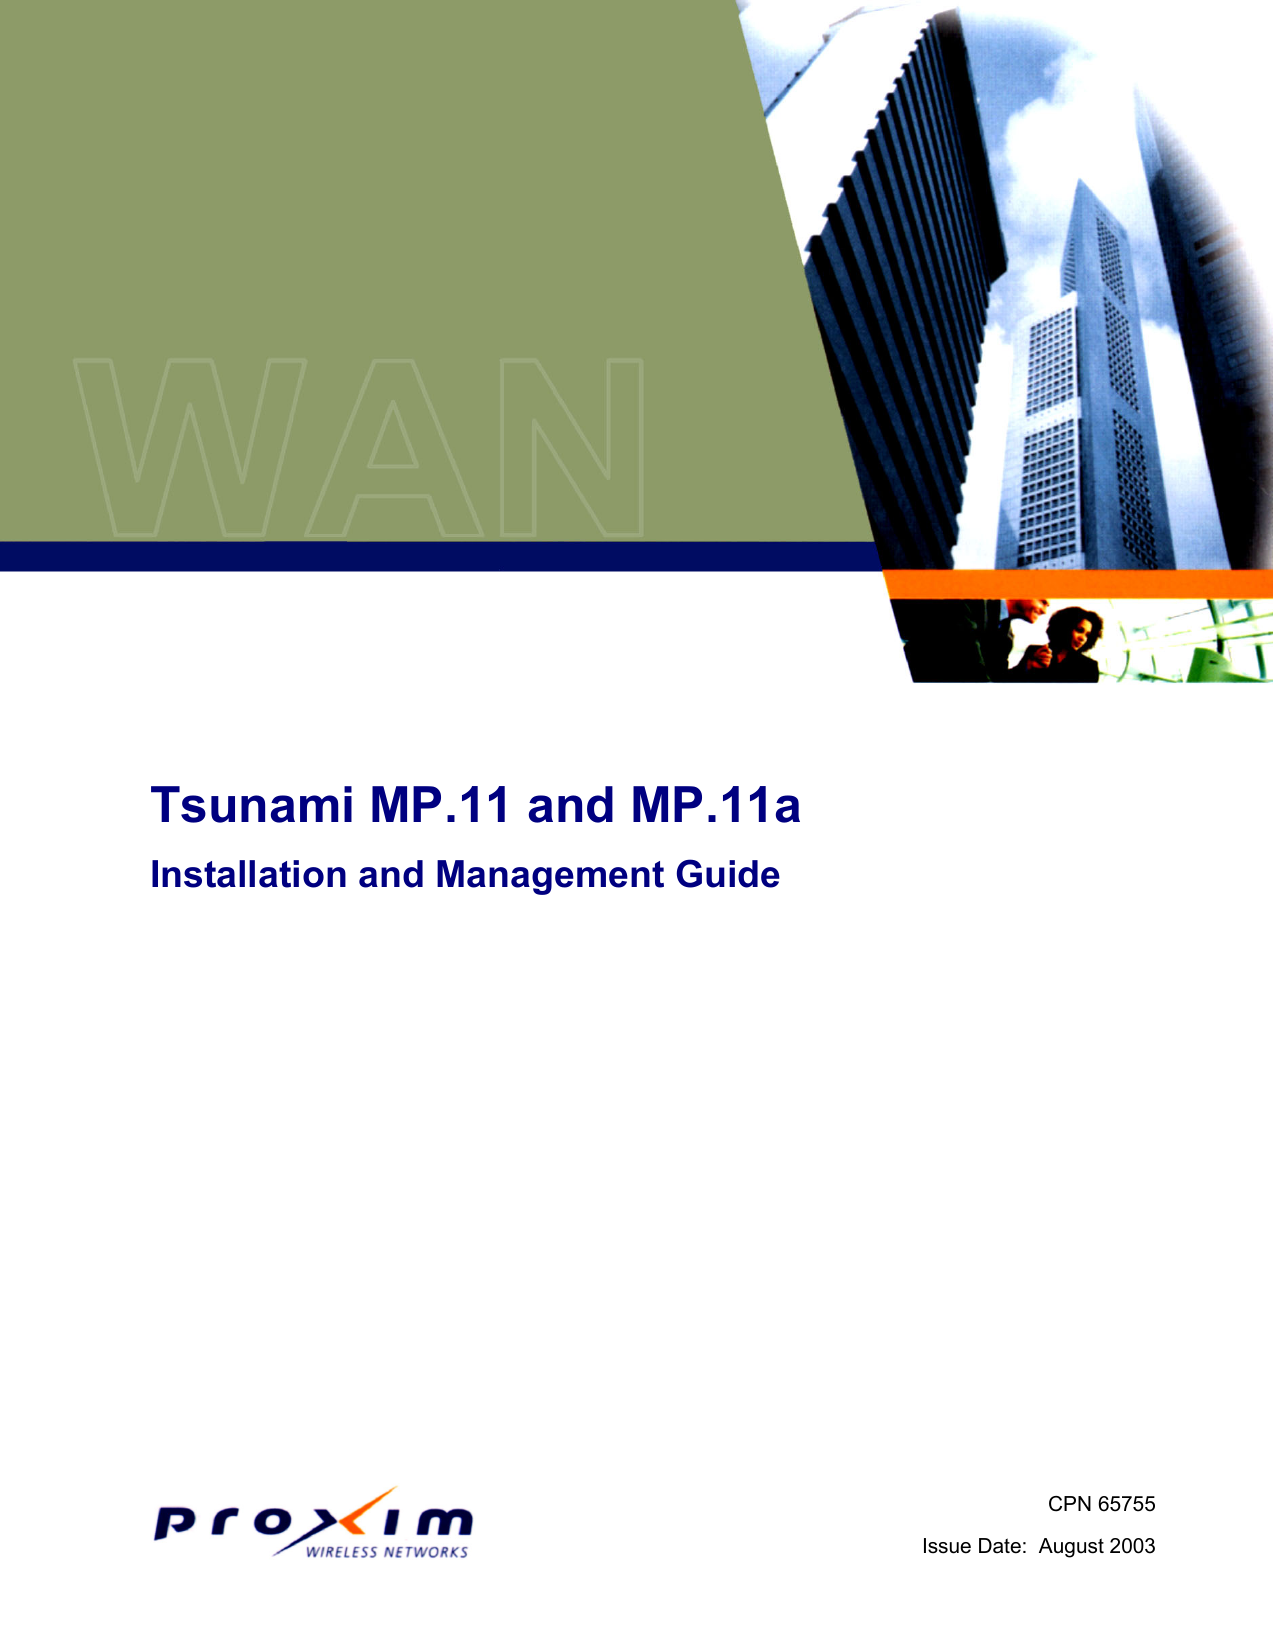   Tsunami MP.11 and MP.11a Installation and Management Guide   CPN 65755Issue Date:  August 2003